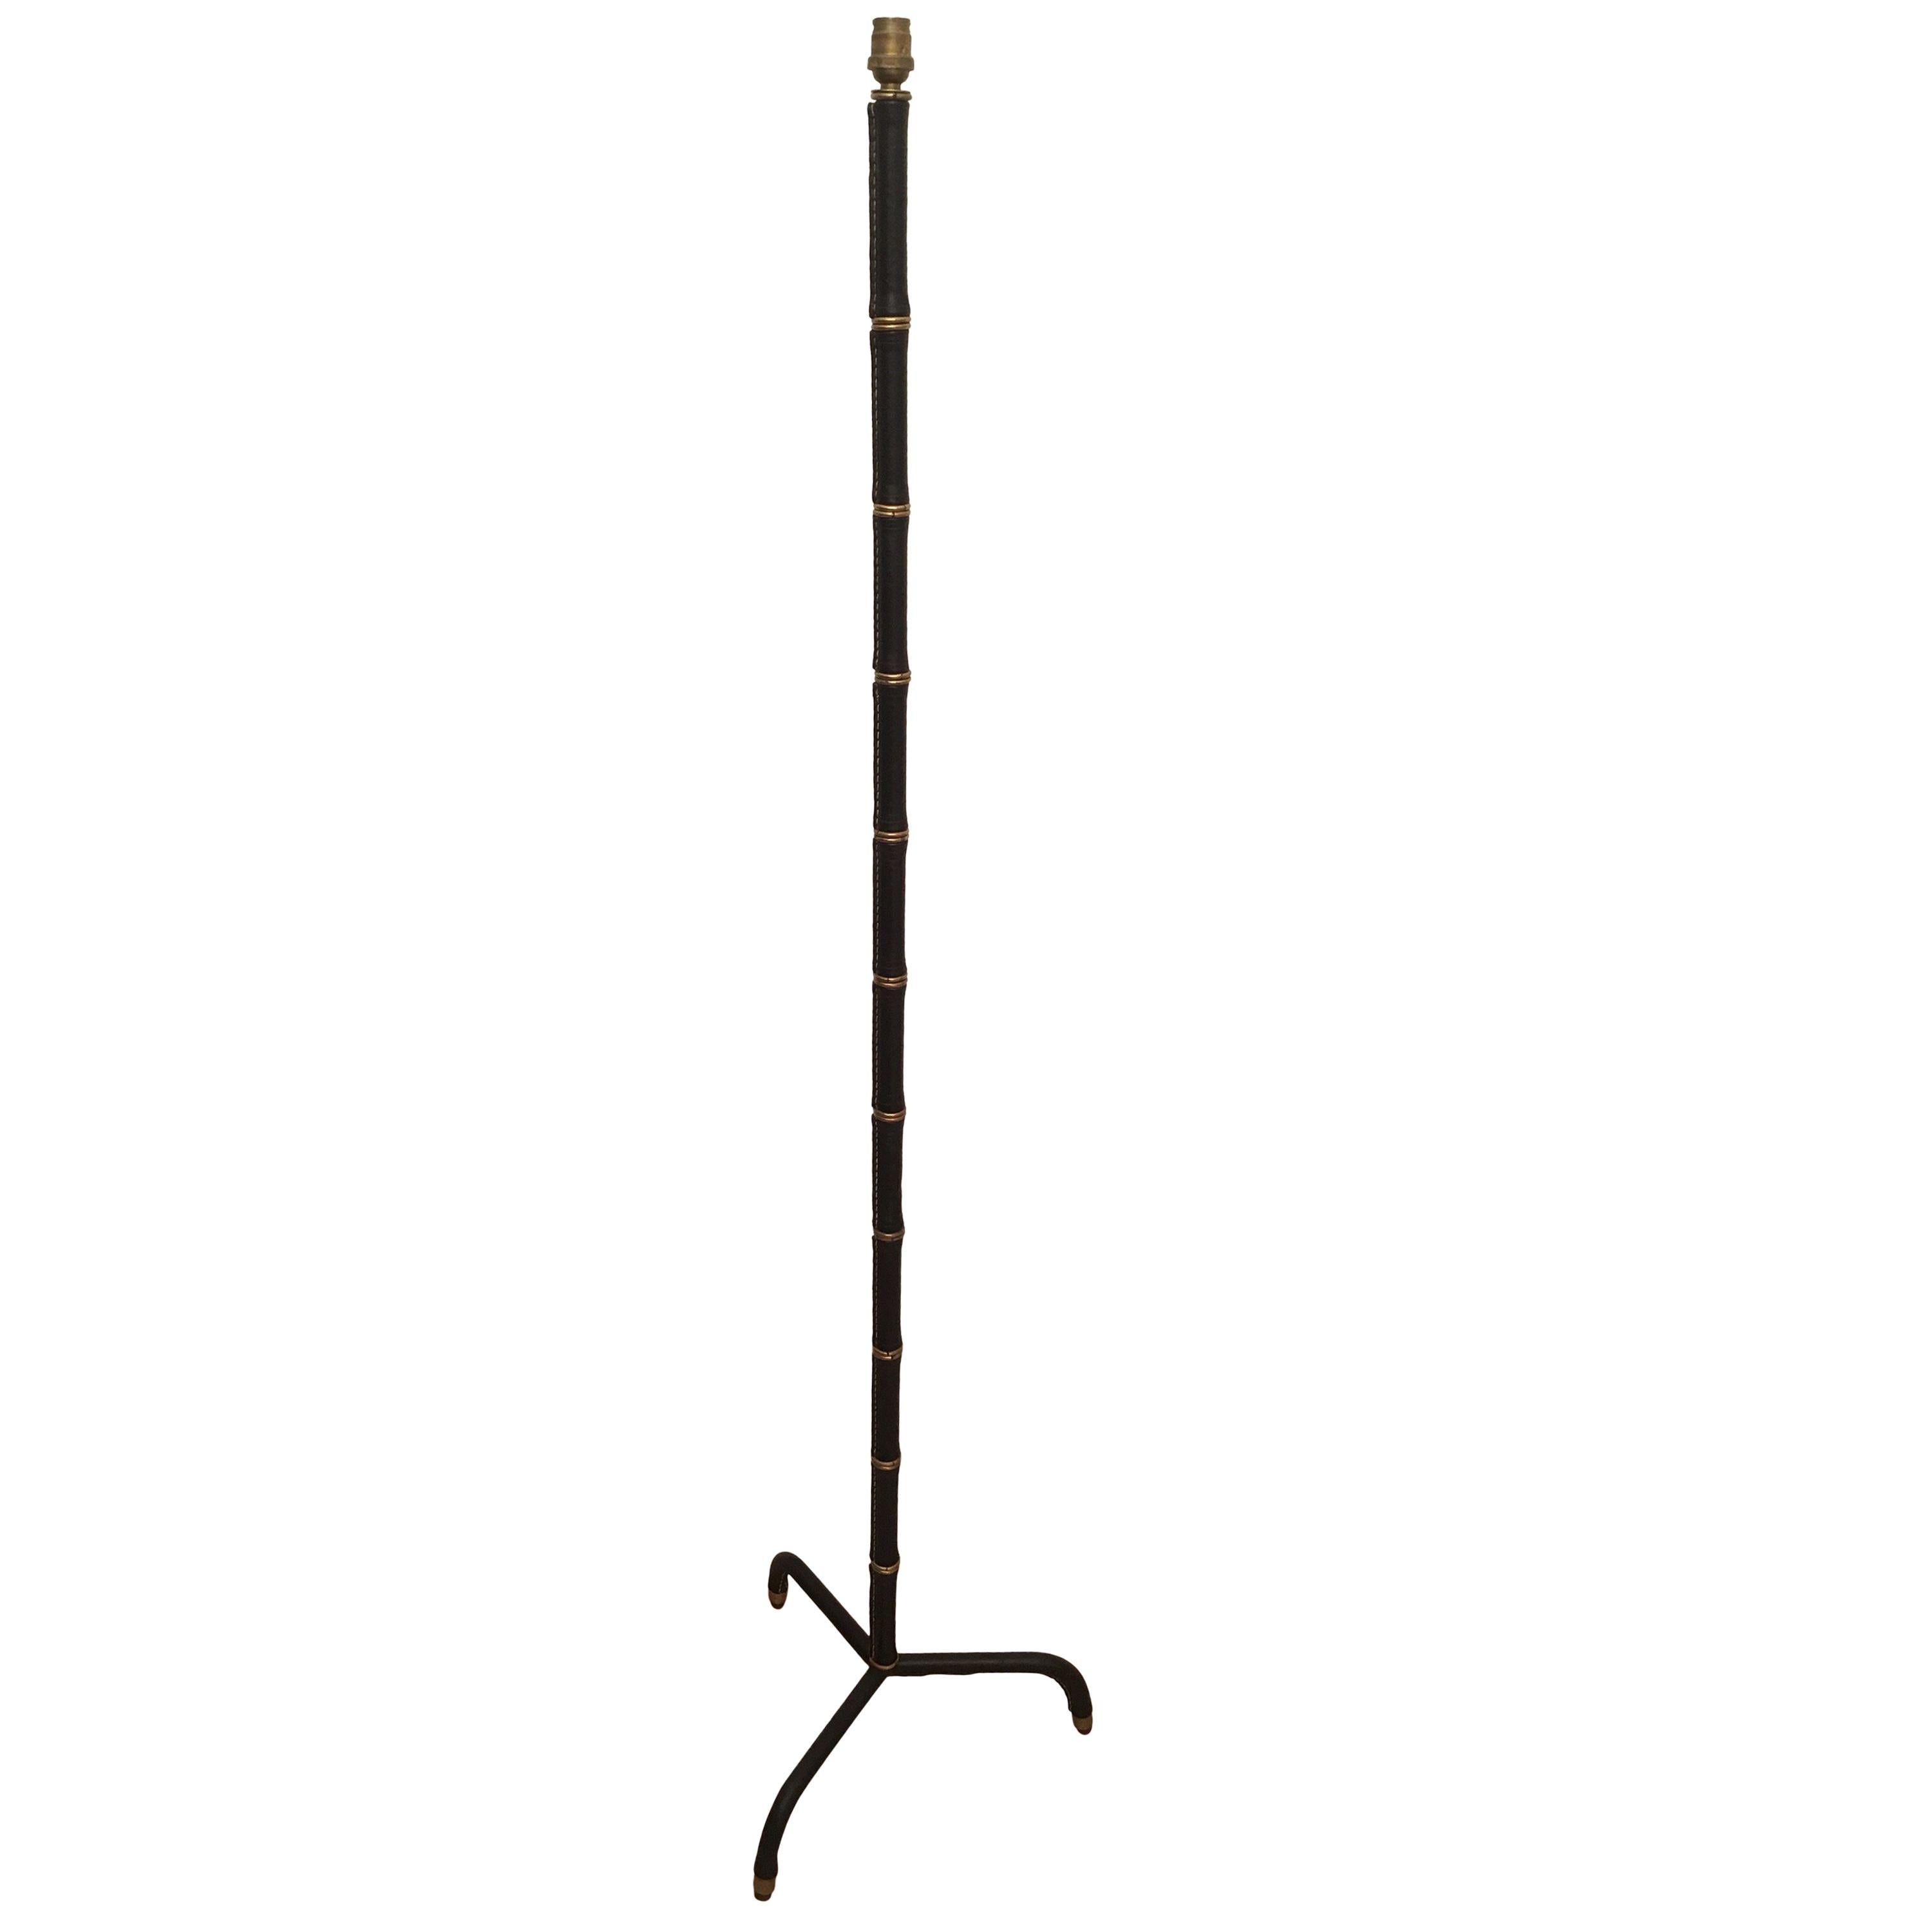 Jacques Adnet Black Stitched Leather Floor Lamp, Bamboo Form, French, 1950s For Sale